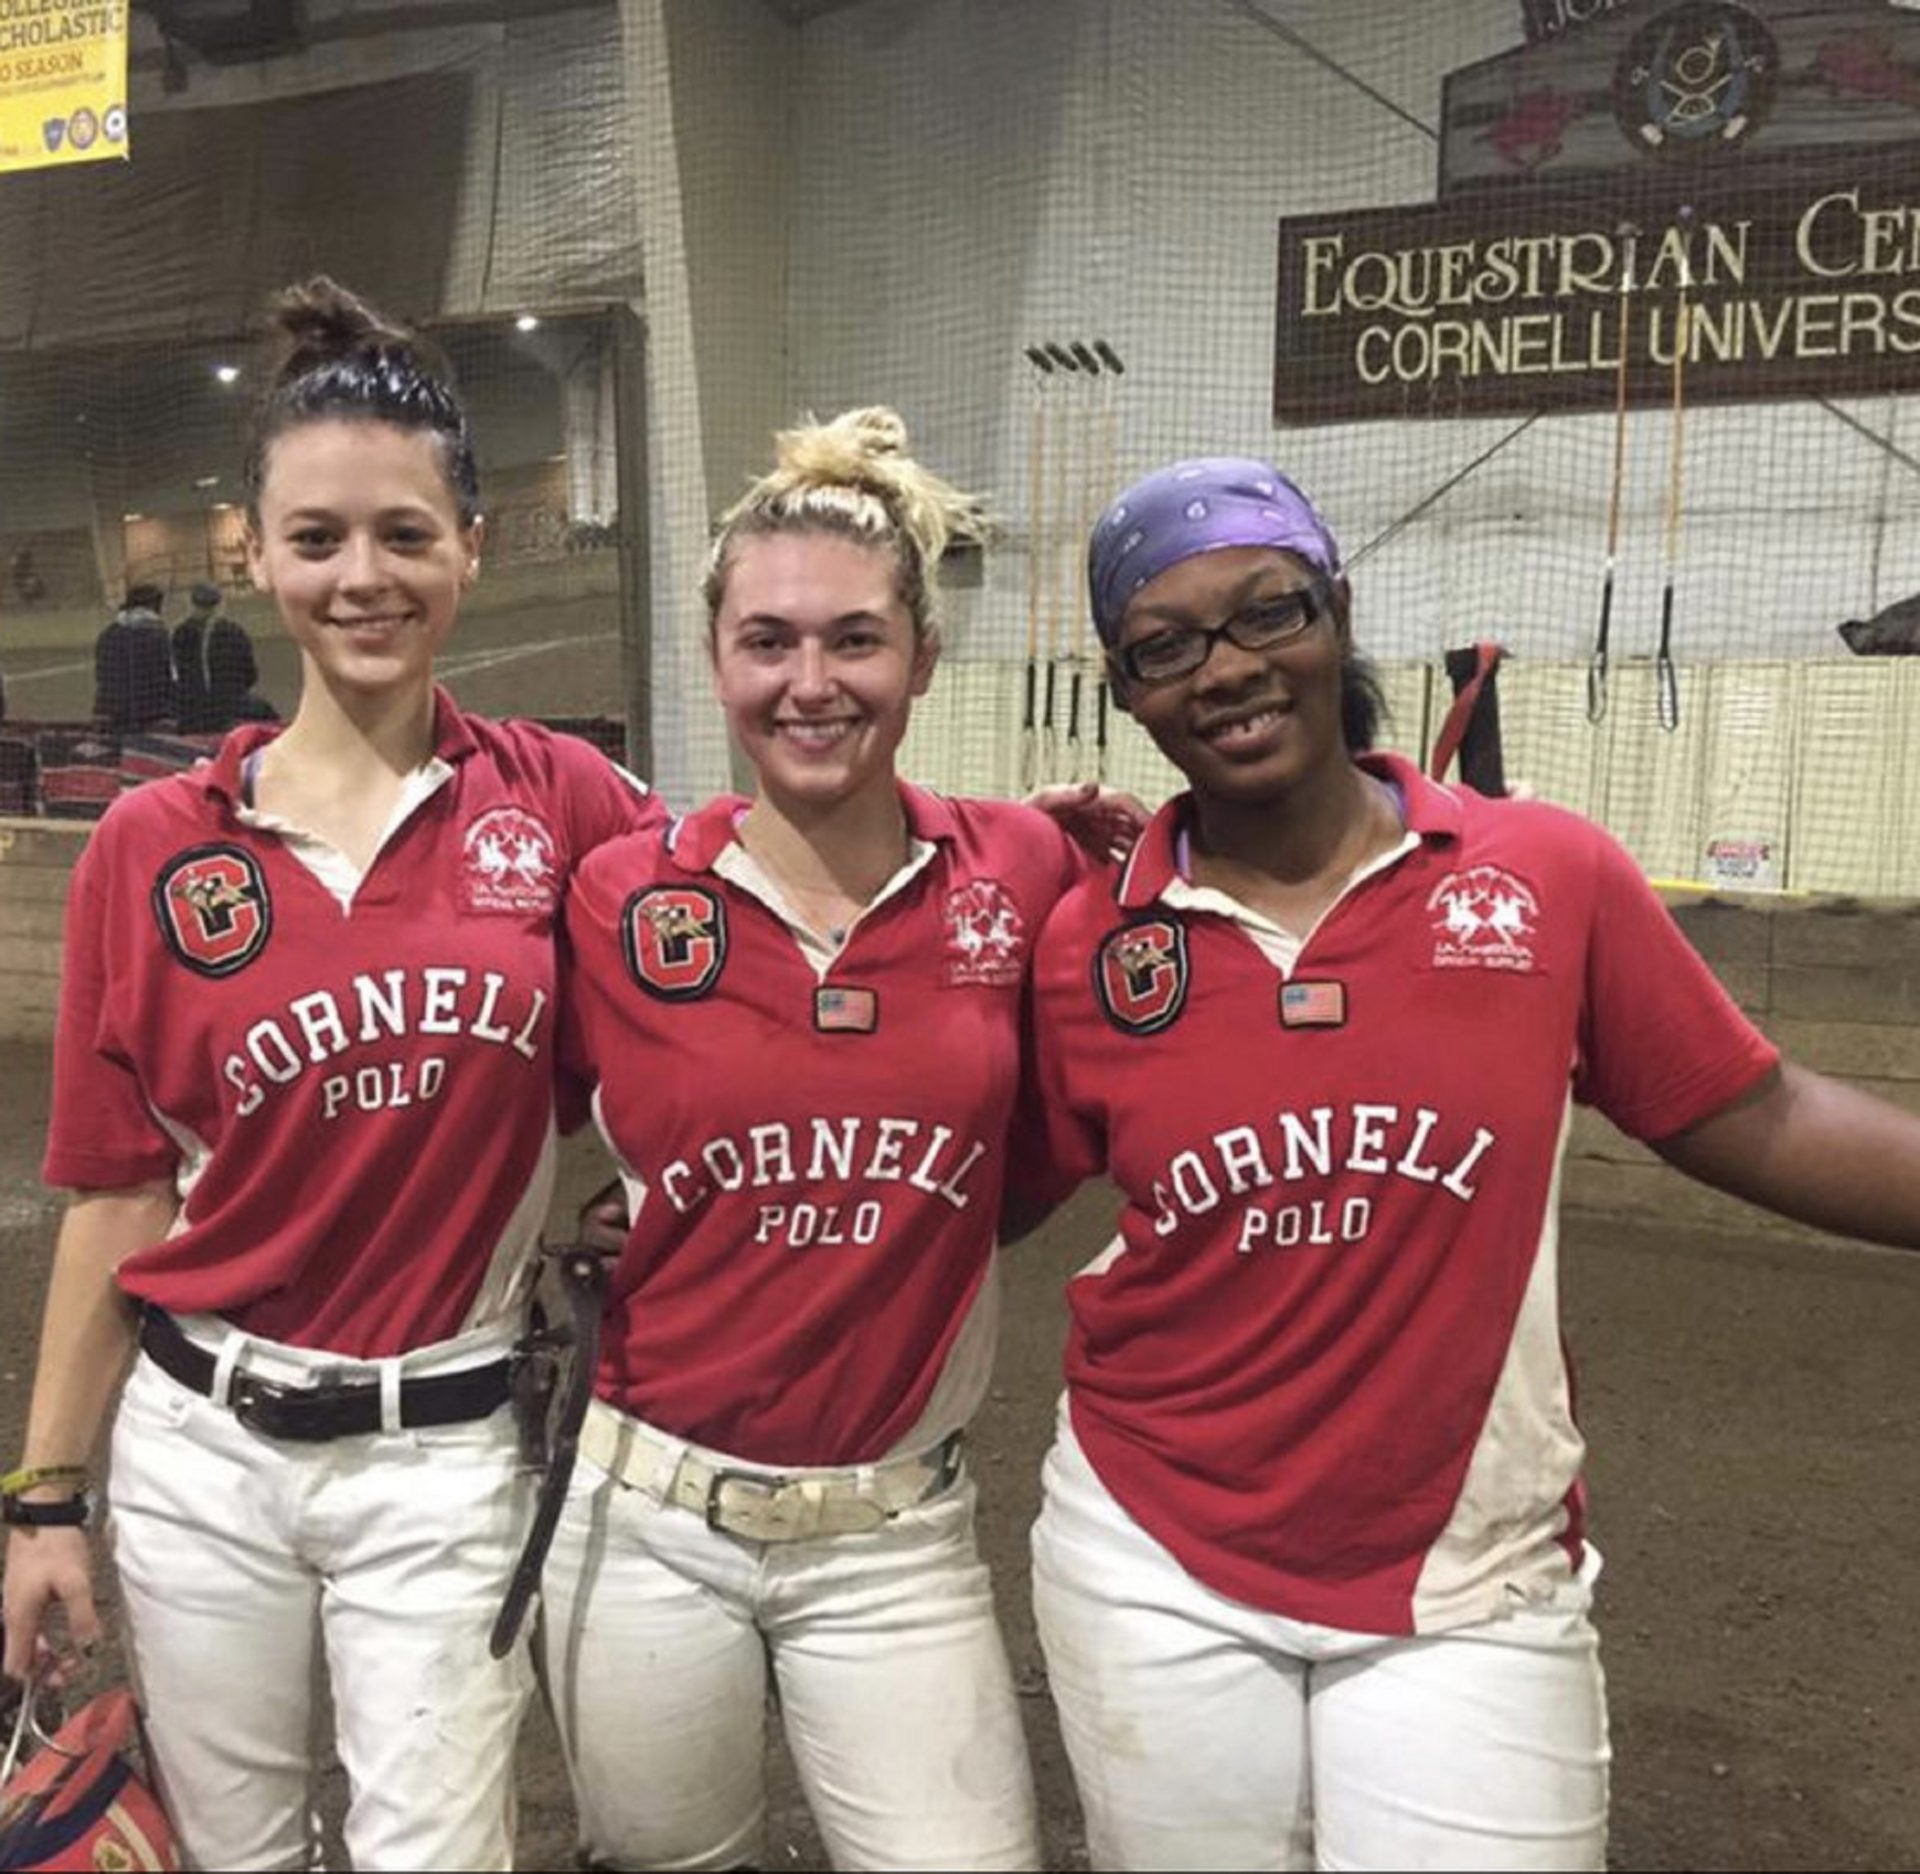 Shariah Harris (right) is one of the captains of the Cornell University polo team.